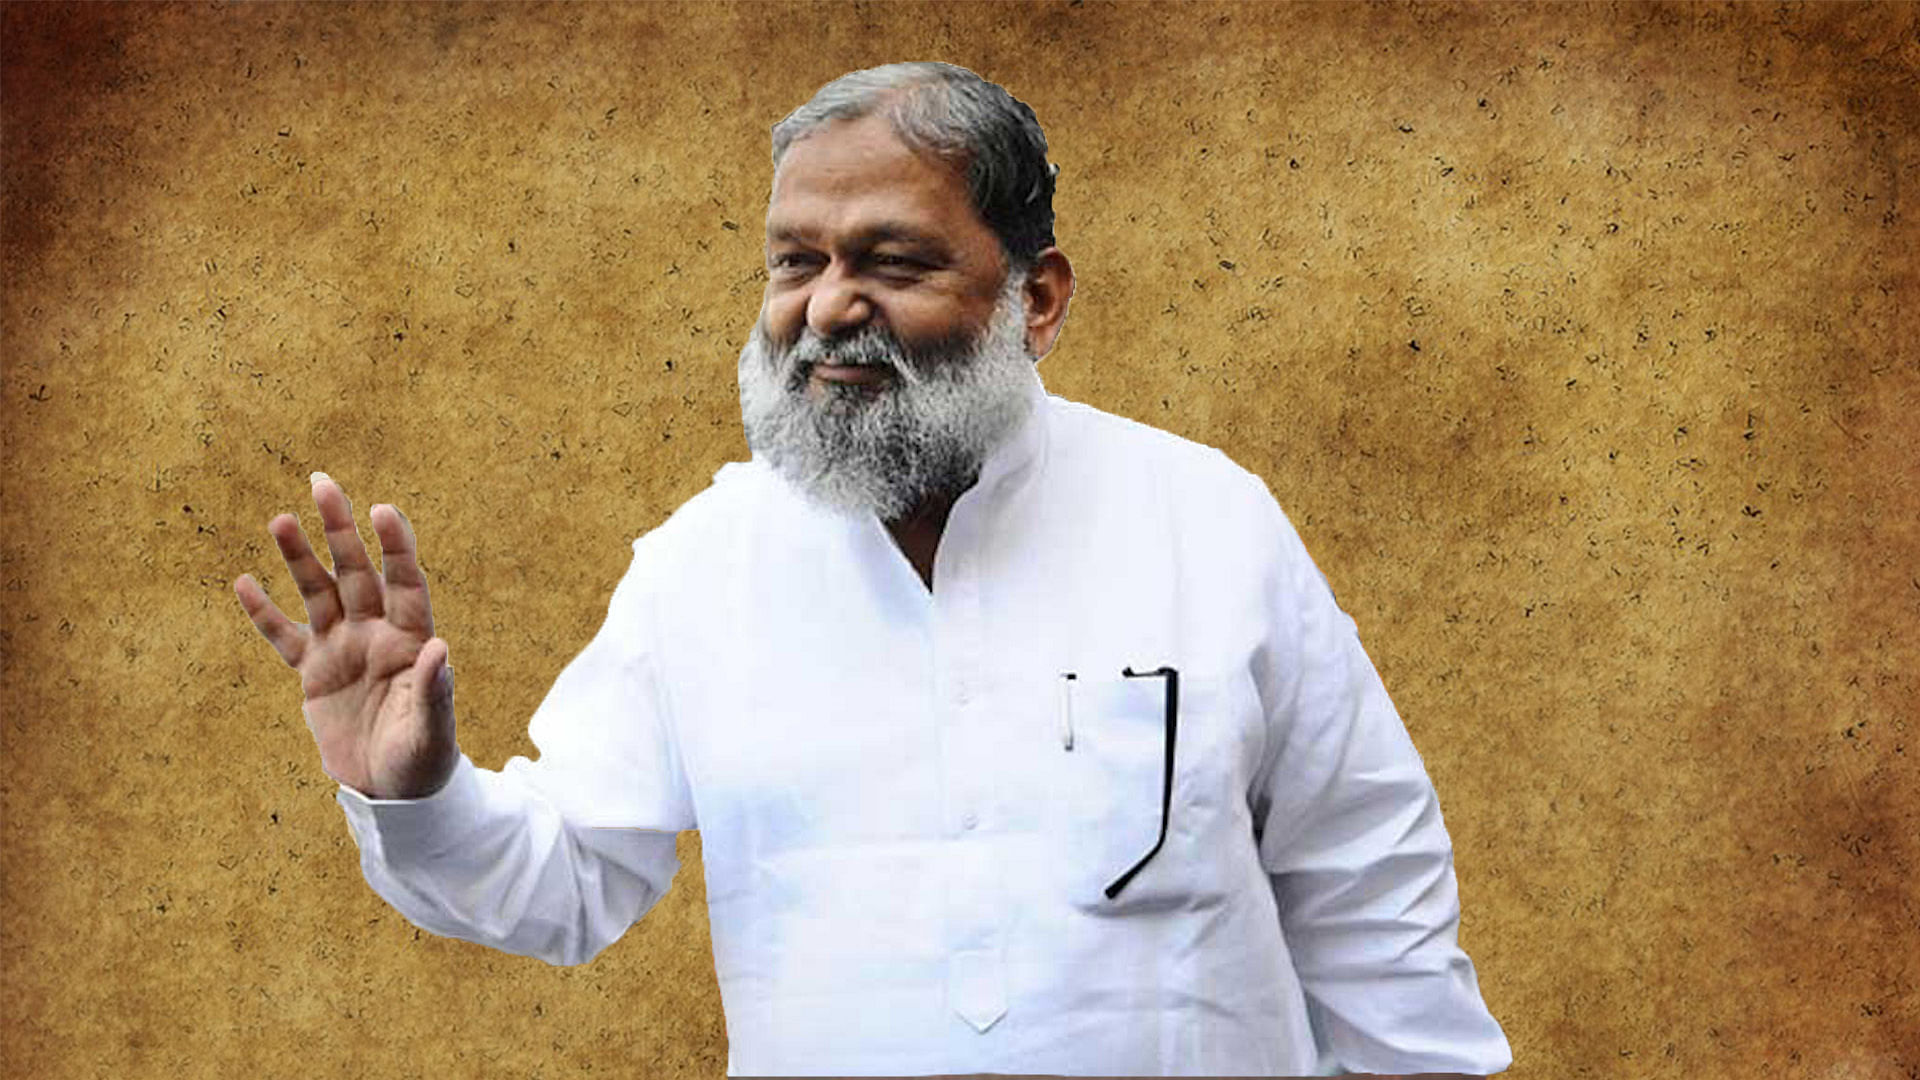 Anil Vij is Haryana’s Sports Minister has now demanded an apology from Manu Bhaker for her ‘jumla’ tweet.